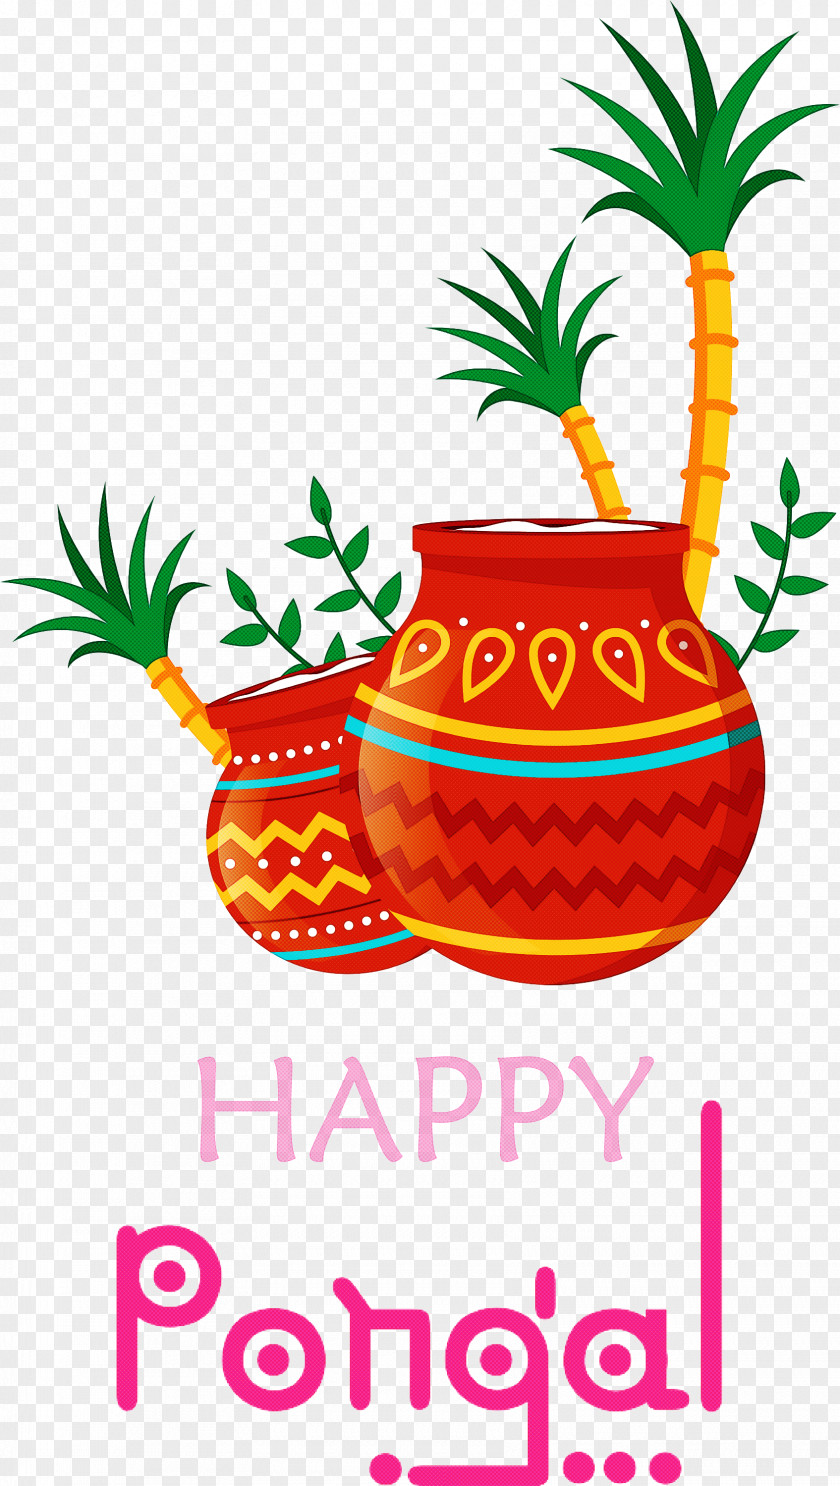 Happy Pongal PNG